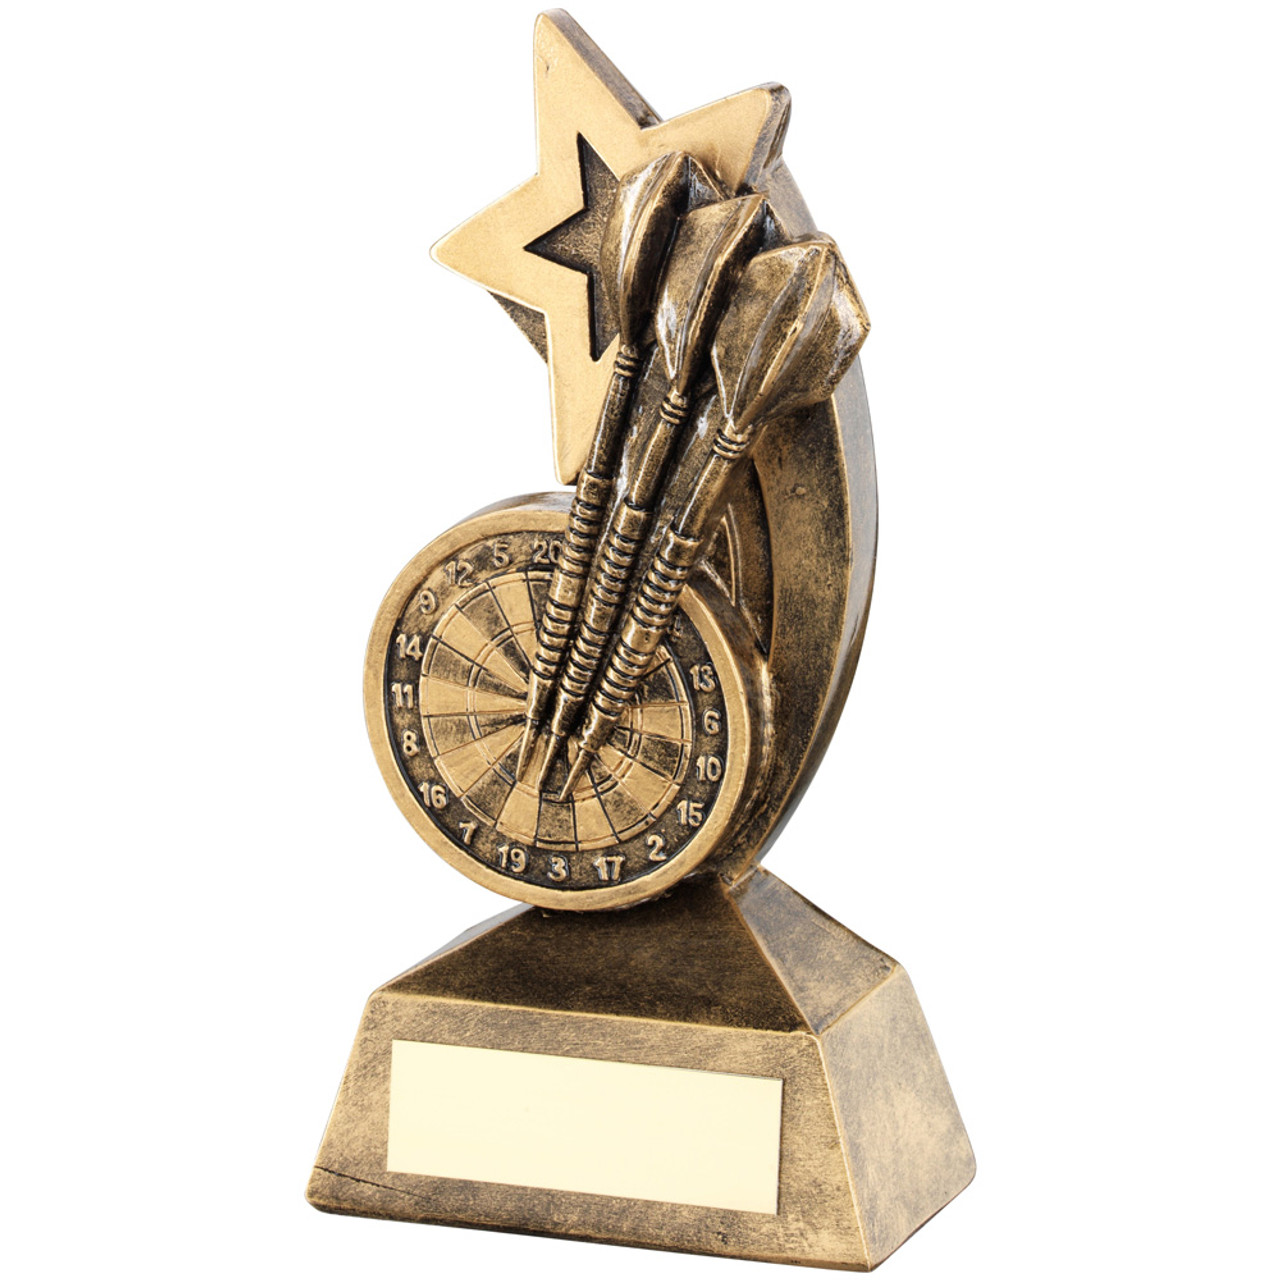 Shooting star Dartboard & Darts award available with FREE personalised engraving